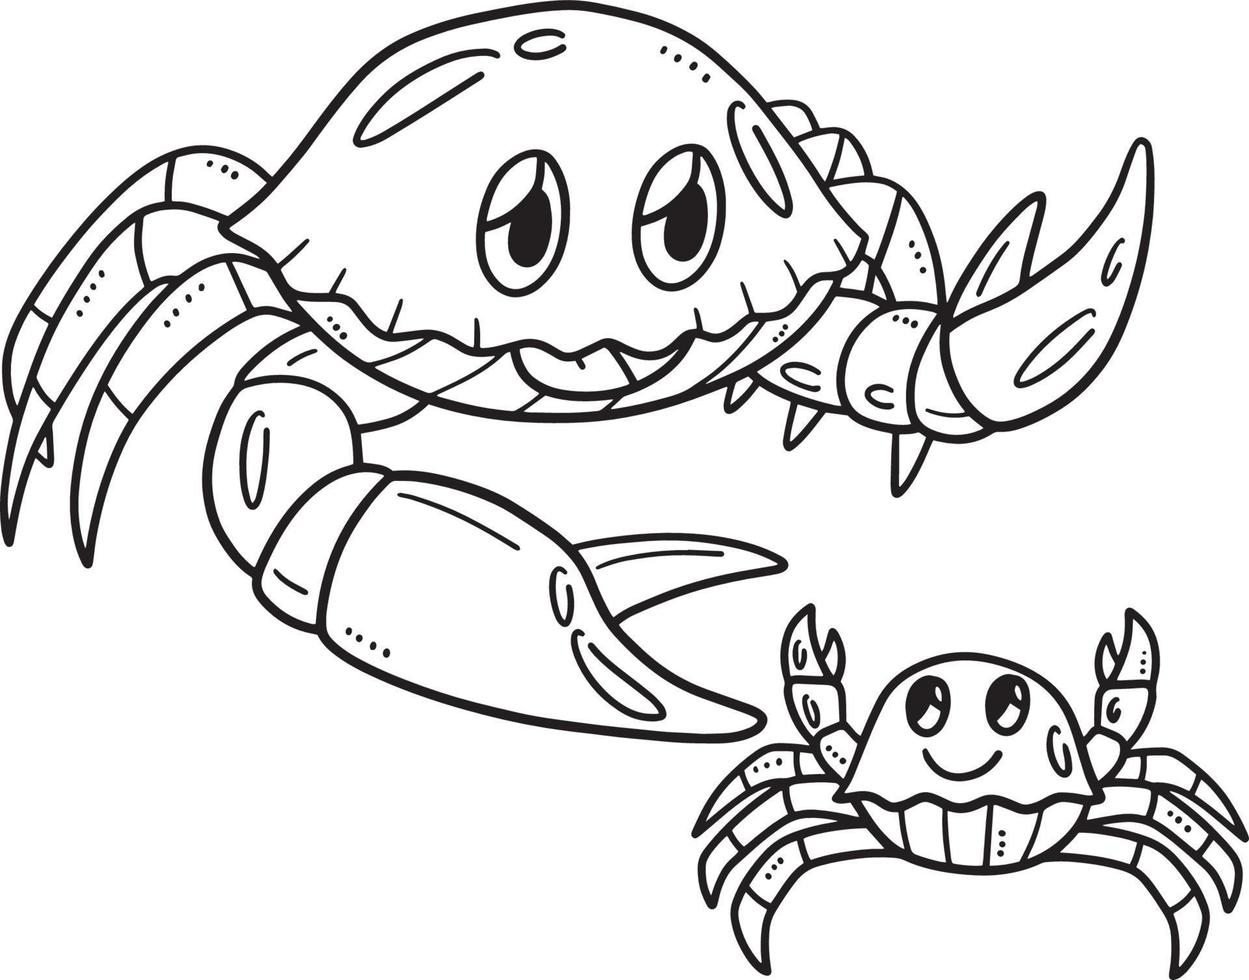 Crabs Isolated Coloring Page for Kids vector